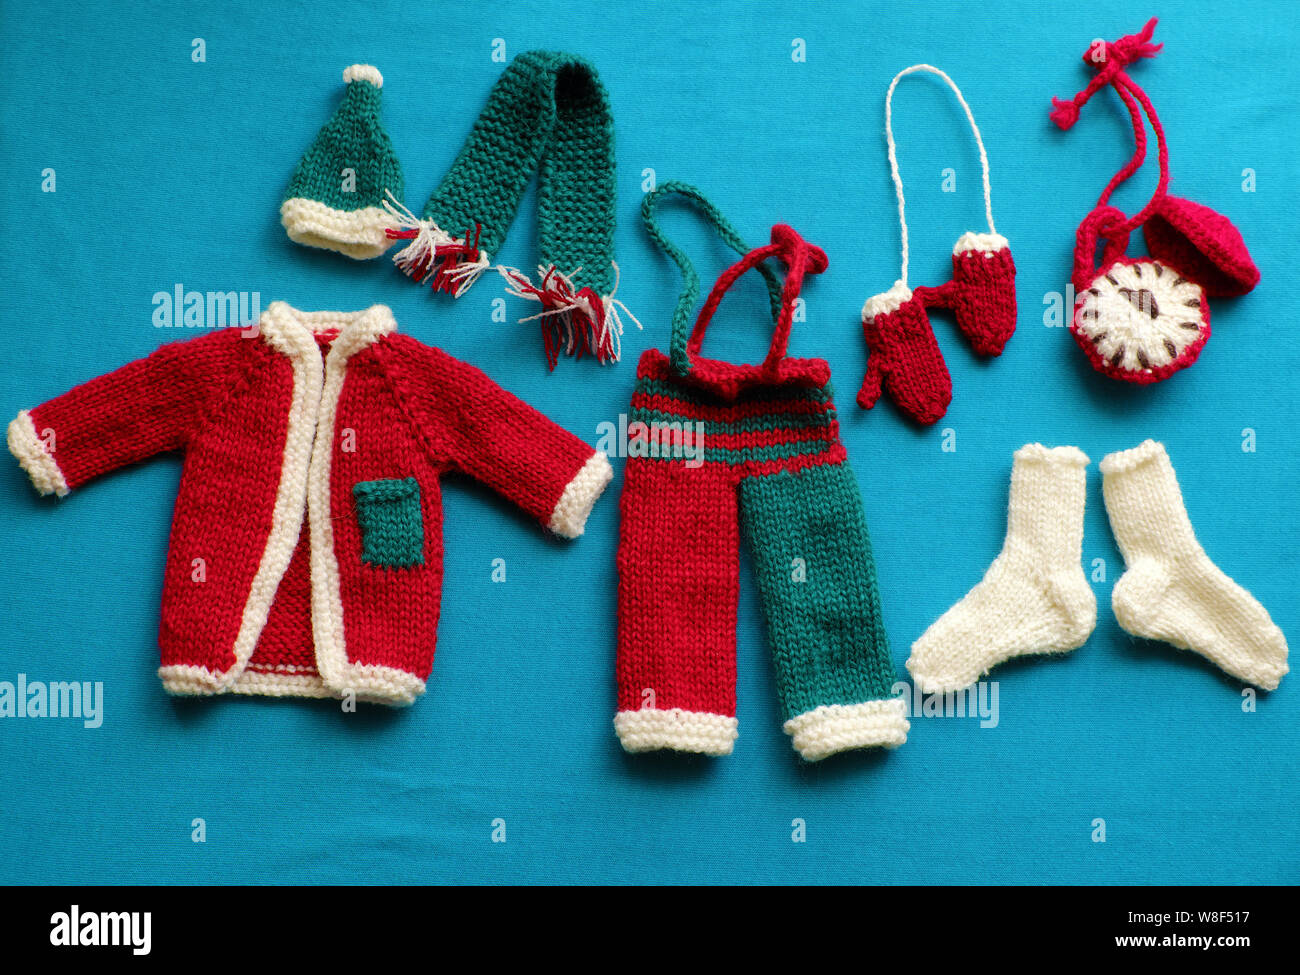 Top view of Santa clothes with accessories as gloves, hat, scarf, socks in white, red and green knit from yarn on blue background, small decorations Stock Photo